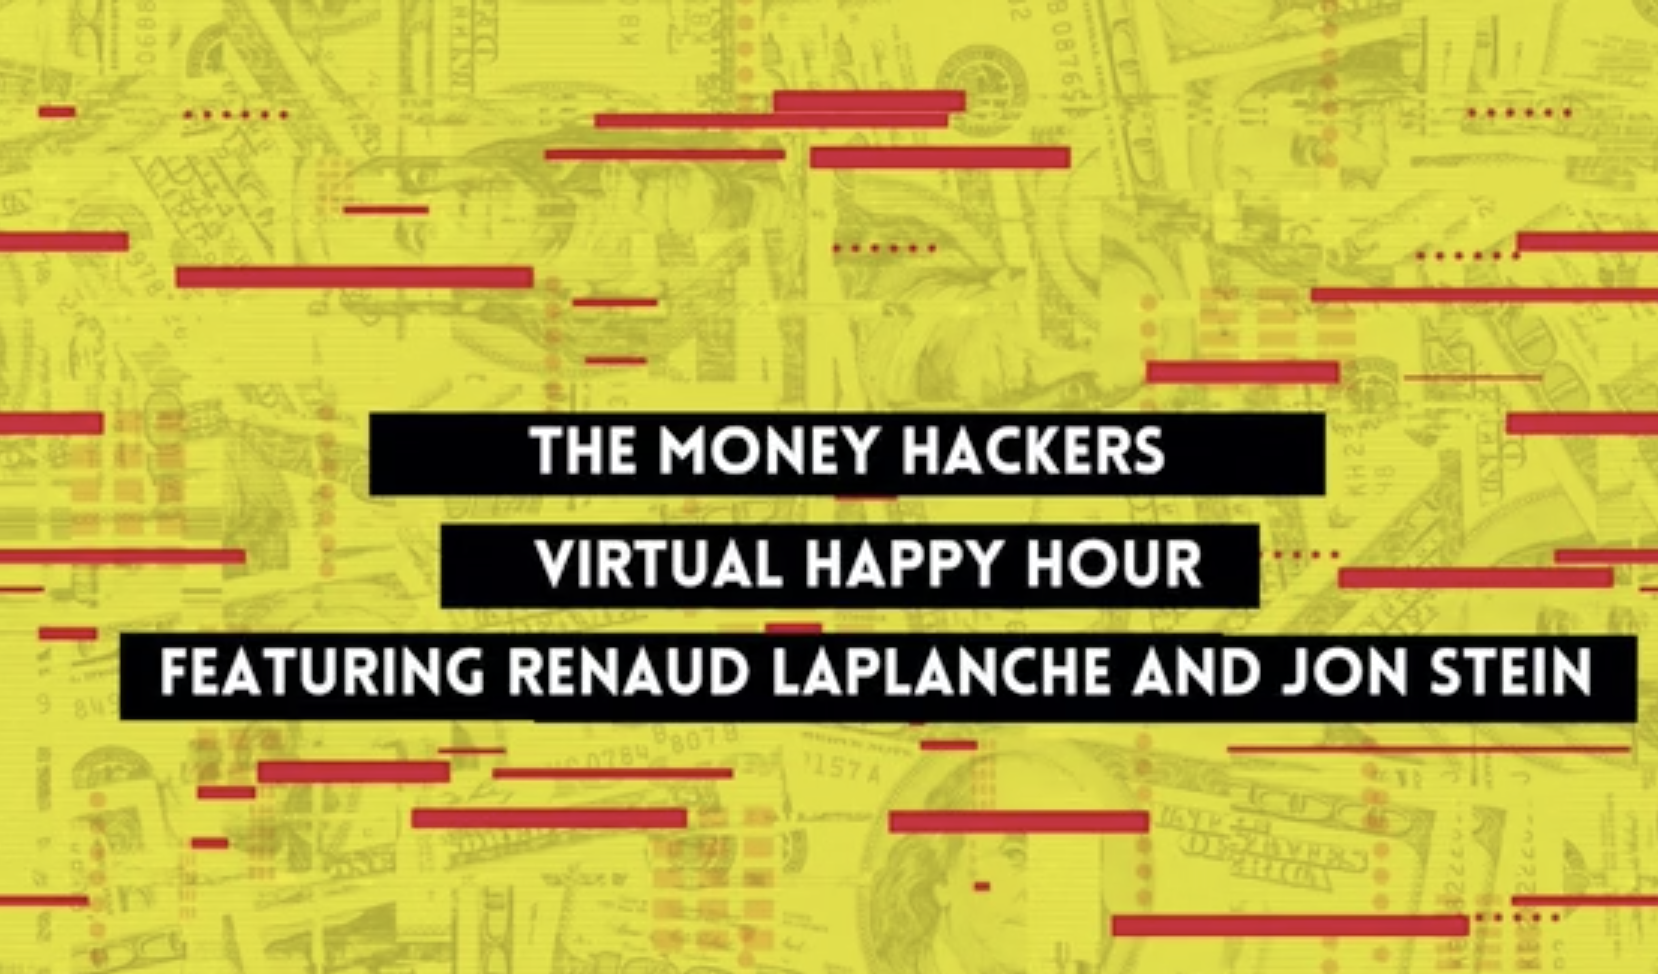 The Money Hackers Virtual Happy Hour Featuring Renaud Laplanche and Jon Stein